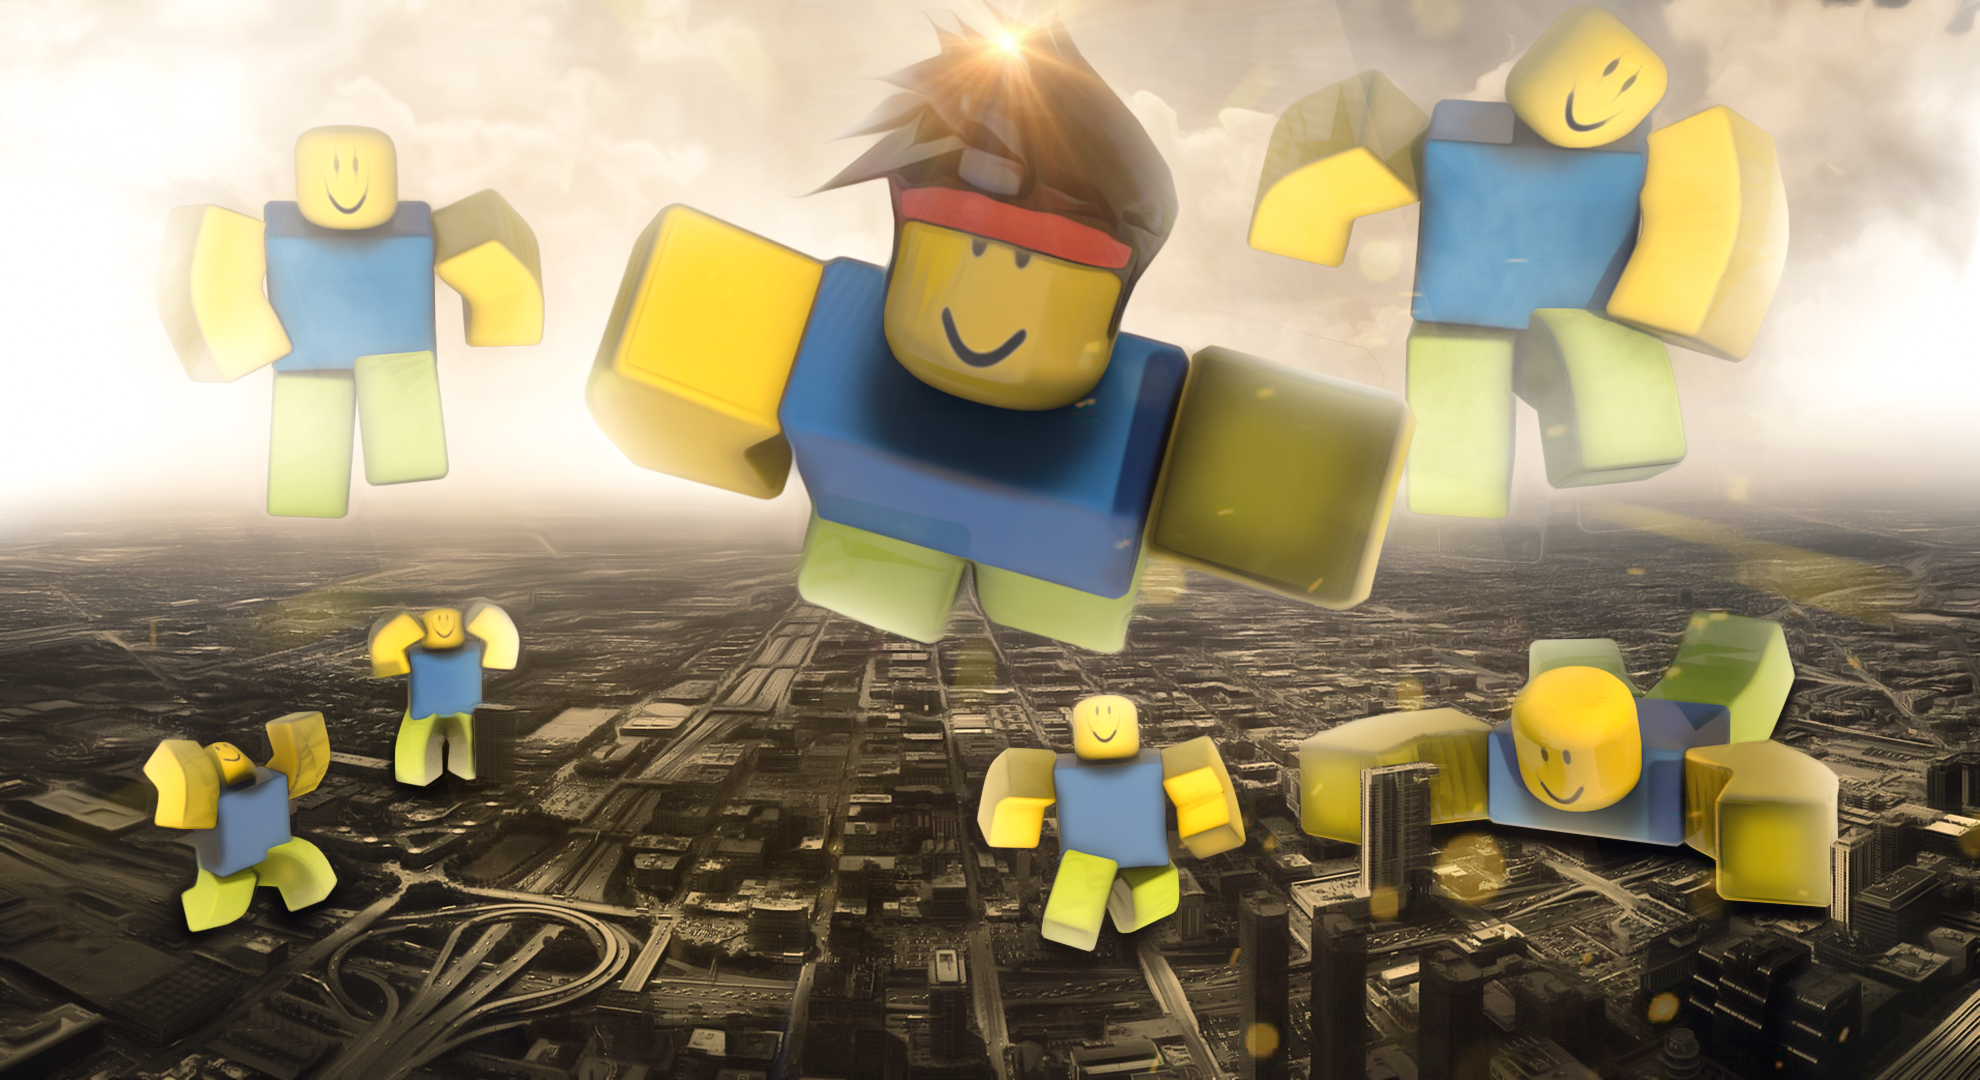 RBXArt on Twitter: "Attack on Noobs! @ROBLOX http://t.co/1WInUXwkpO